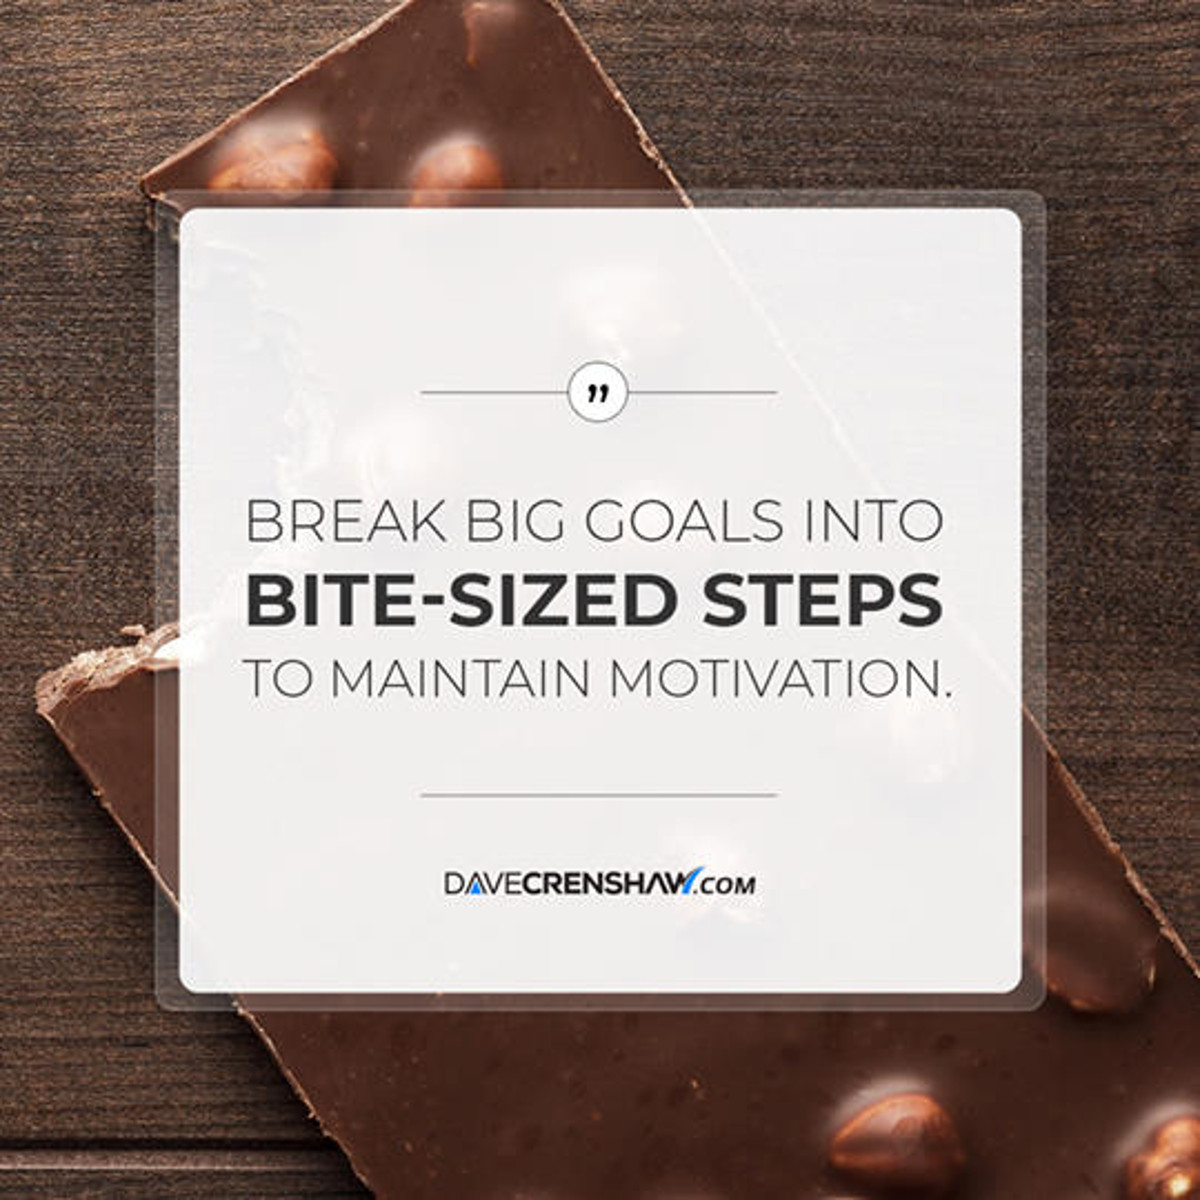 Break a big goal into bite-sized steps to maintain motivation